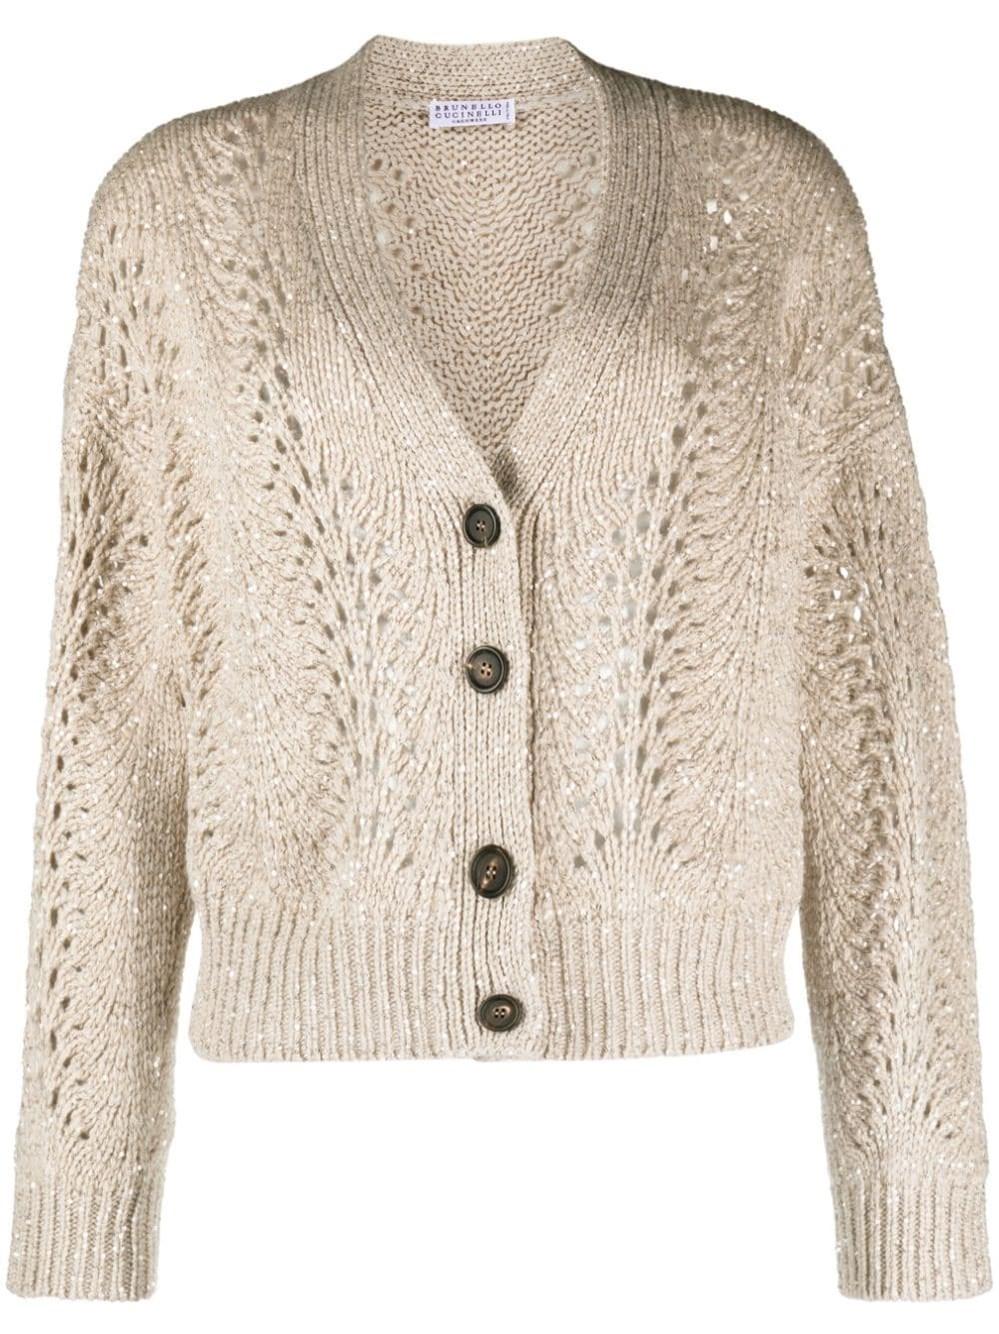 Brunello Cucinelli Sequined Open-knit Cardigan in Natural | Lyst